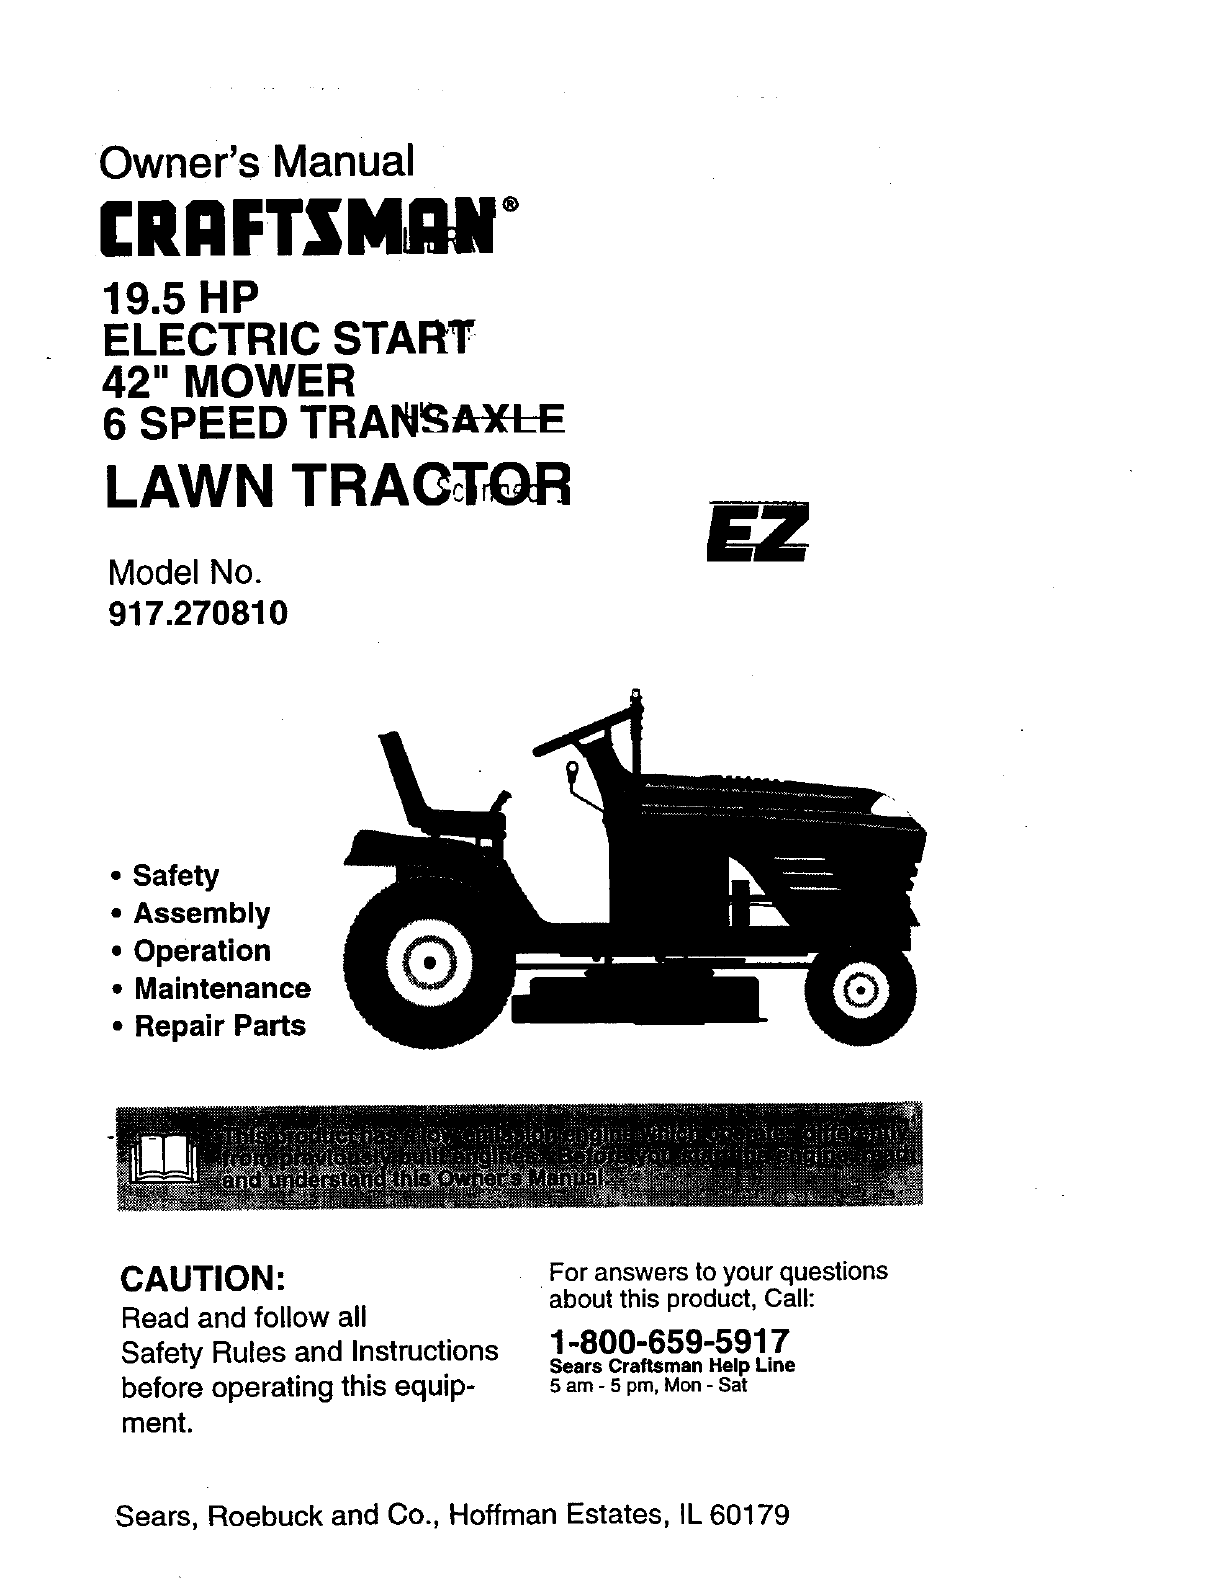 Craftsman 917270810 User Manual Tractor Manuals And Guides 98100087